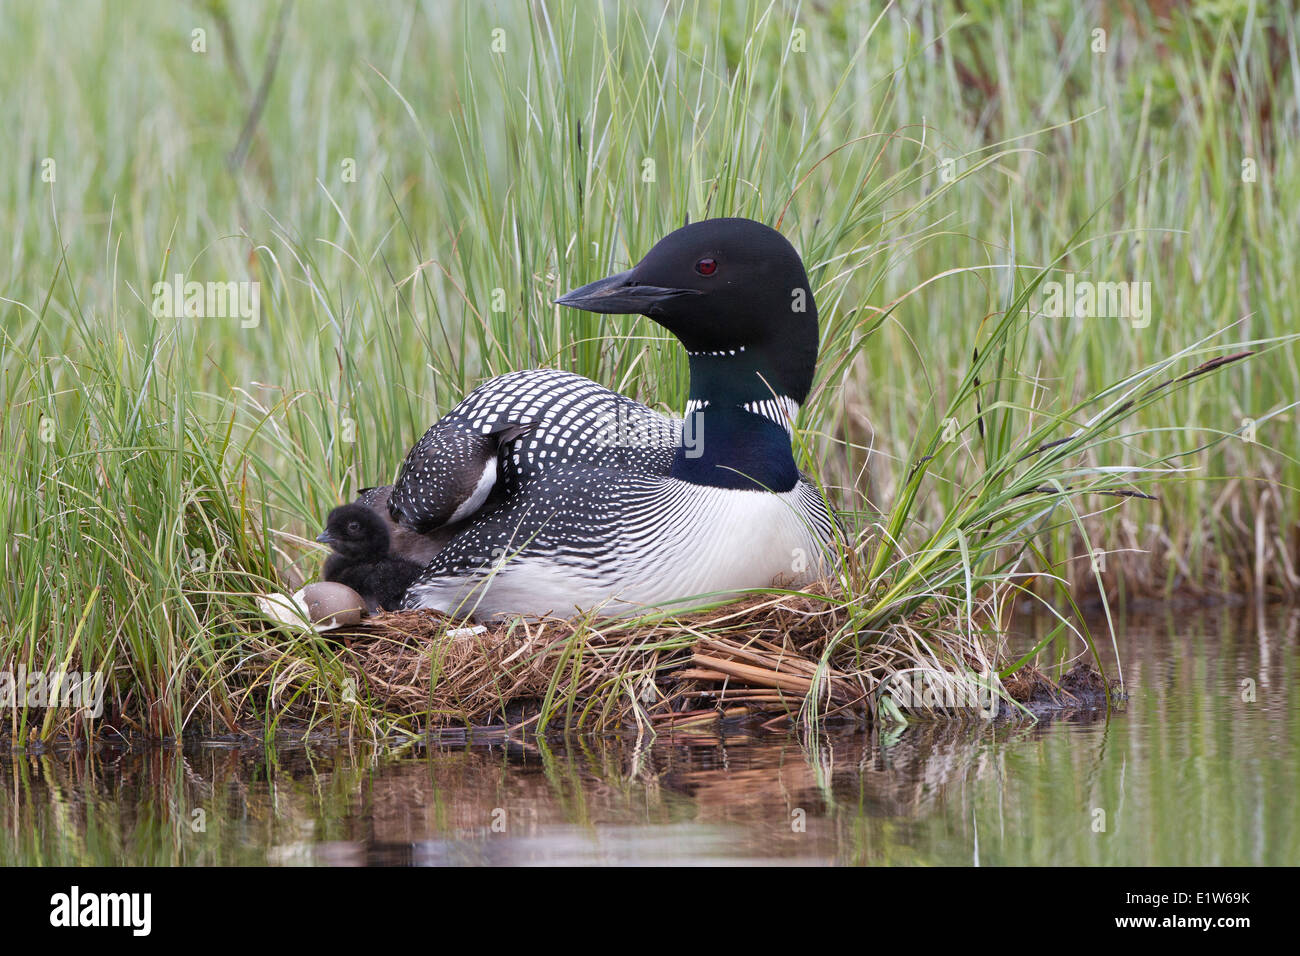 Common loon (Gavia immer) adult with chick on nest interior British Columbia. The less-than-a-day old chick is next to the Stock Photo